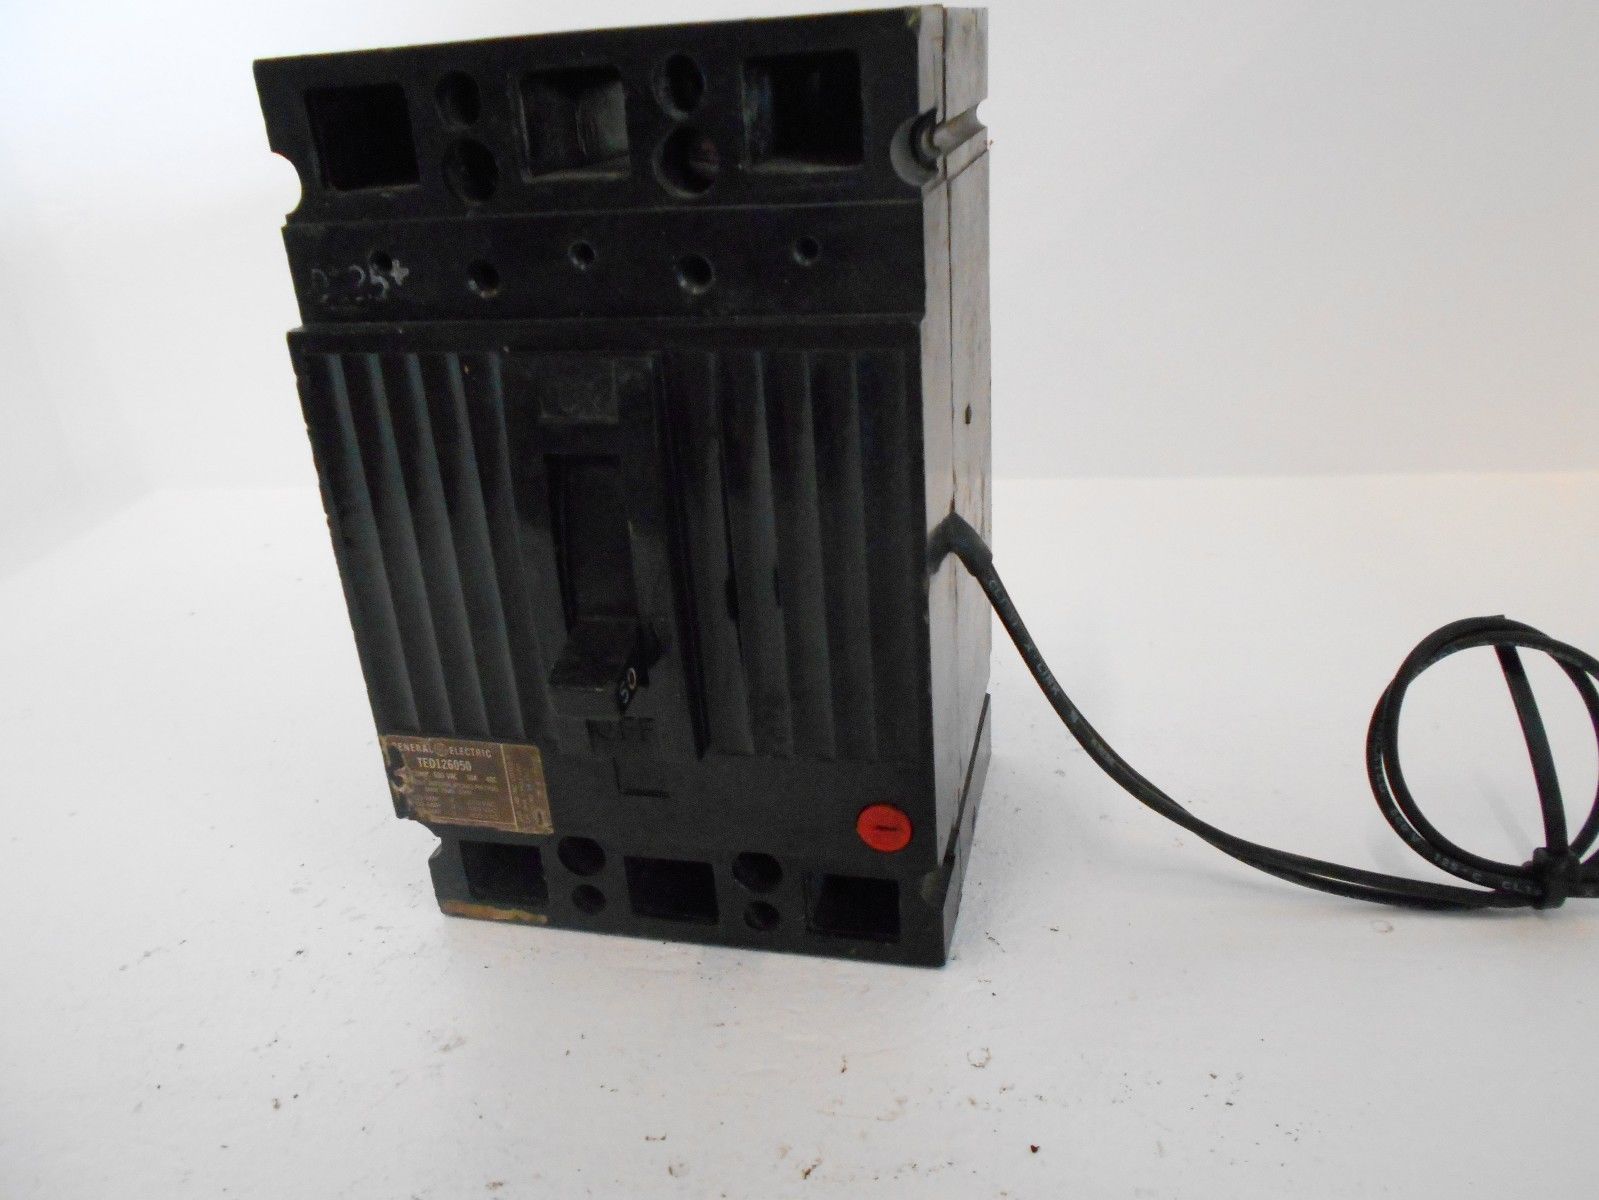 GE GENERAL ELECTRIC TED126050 2 POLE 50 AMP 600V CIRCUIT BREAKER WITH SHUNT TRIP Powered